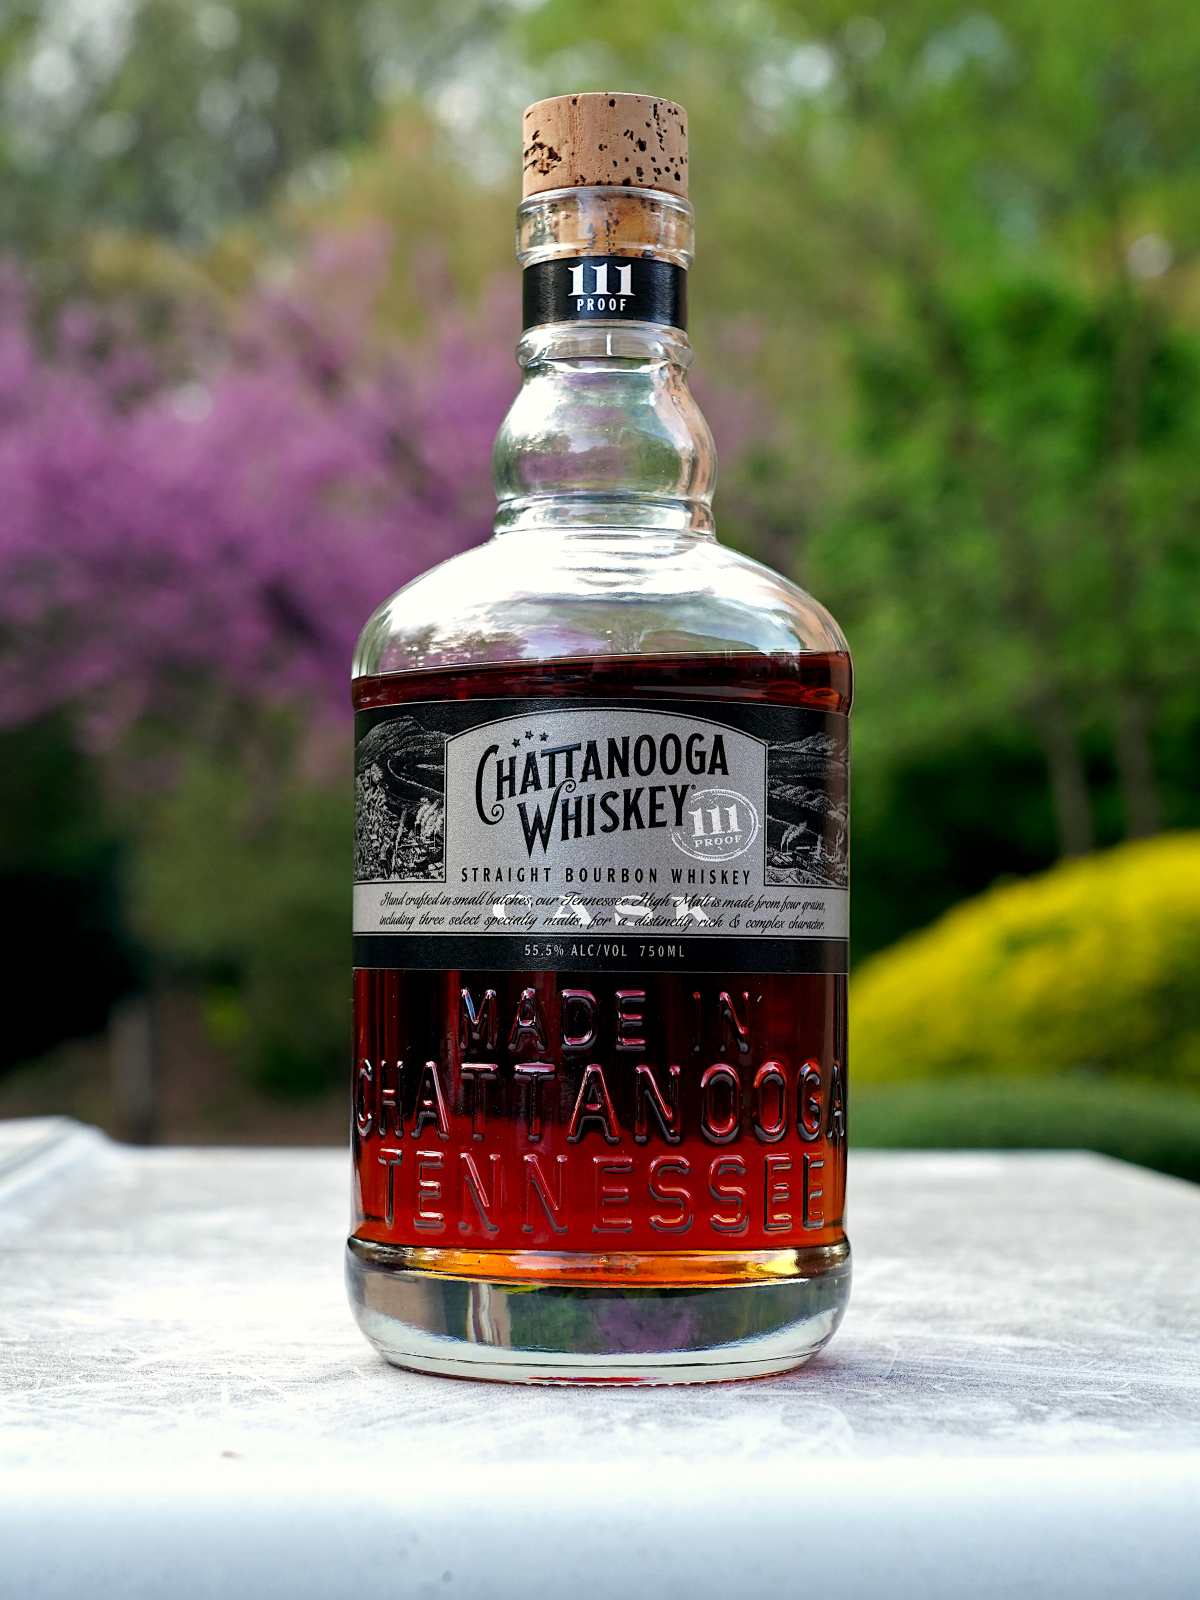 chattanooga whiskey 111 featured